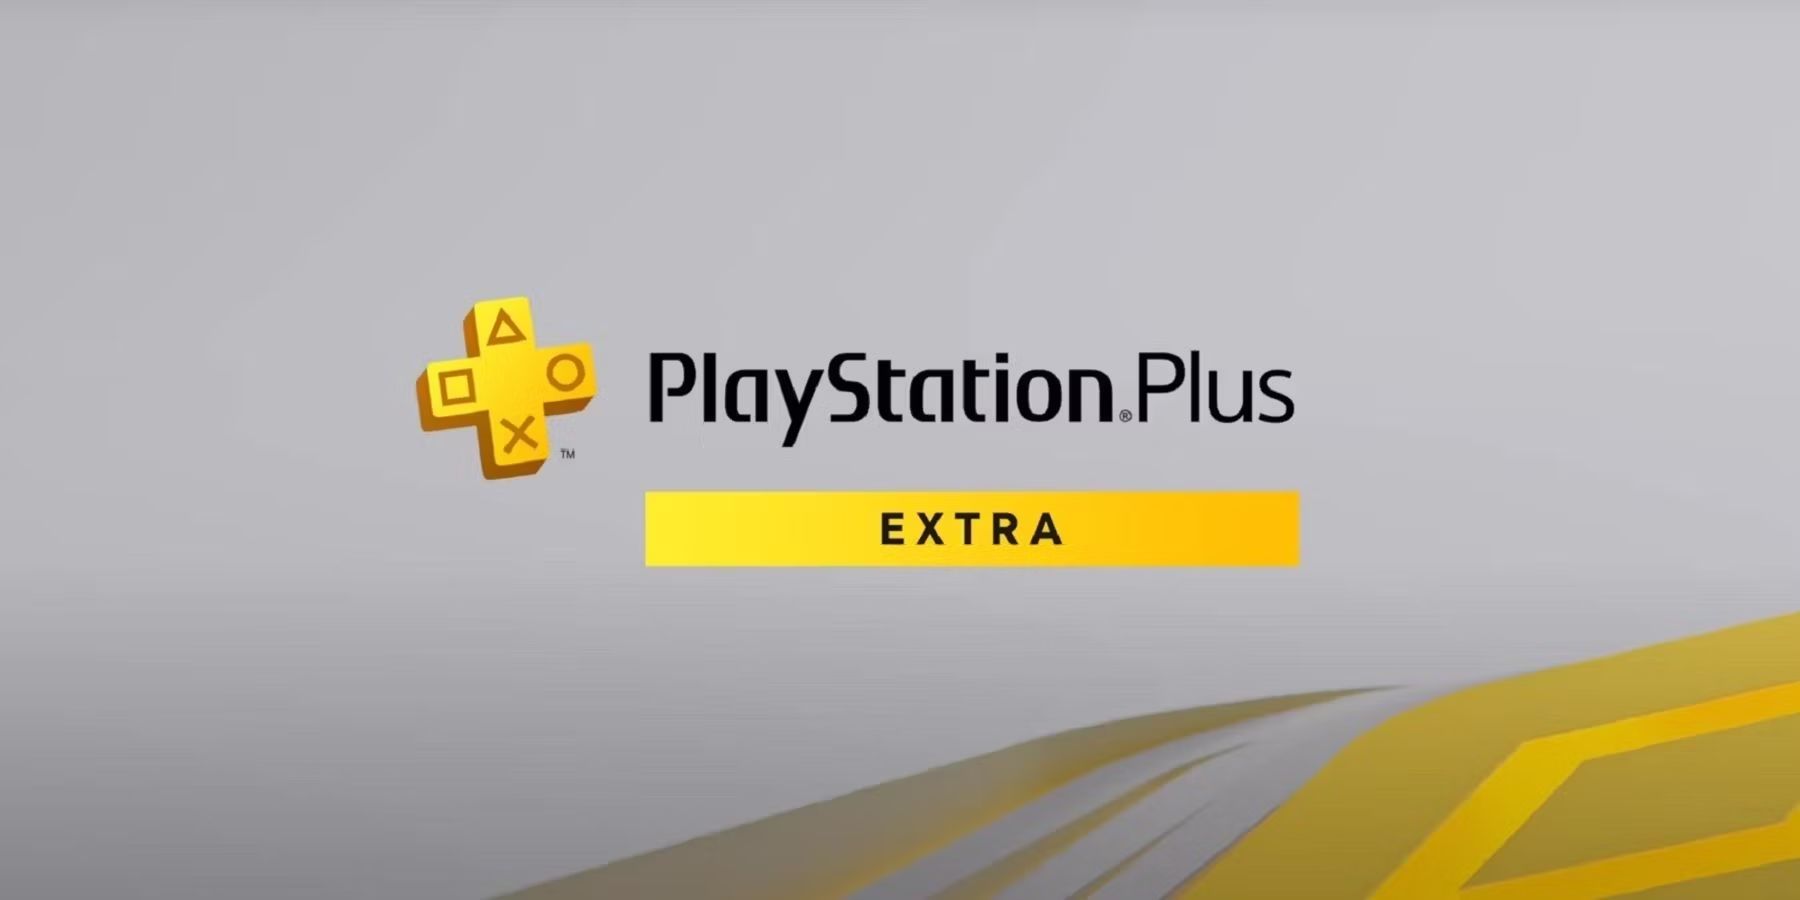 PS Plus Extra is Losing 9 Games in January 2024